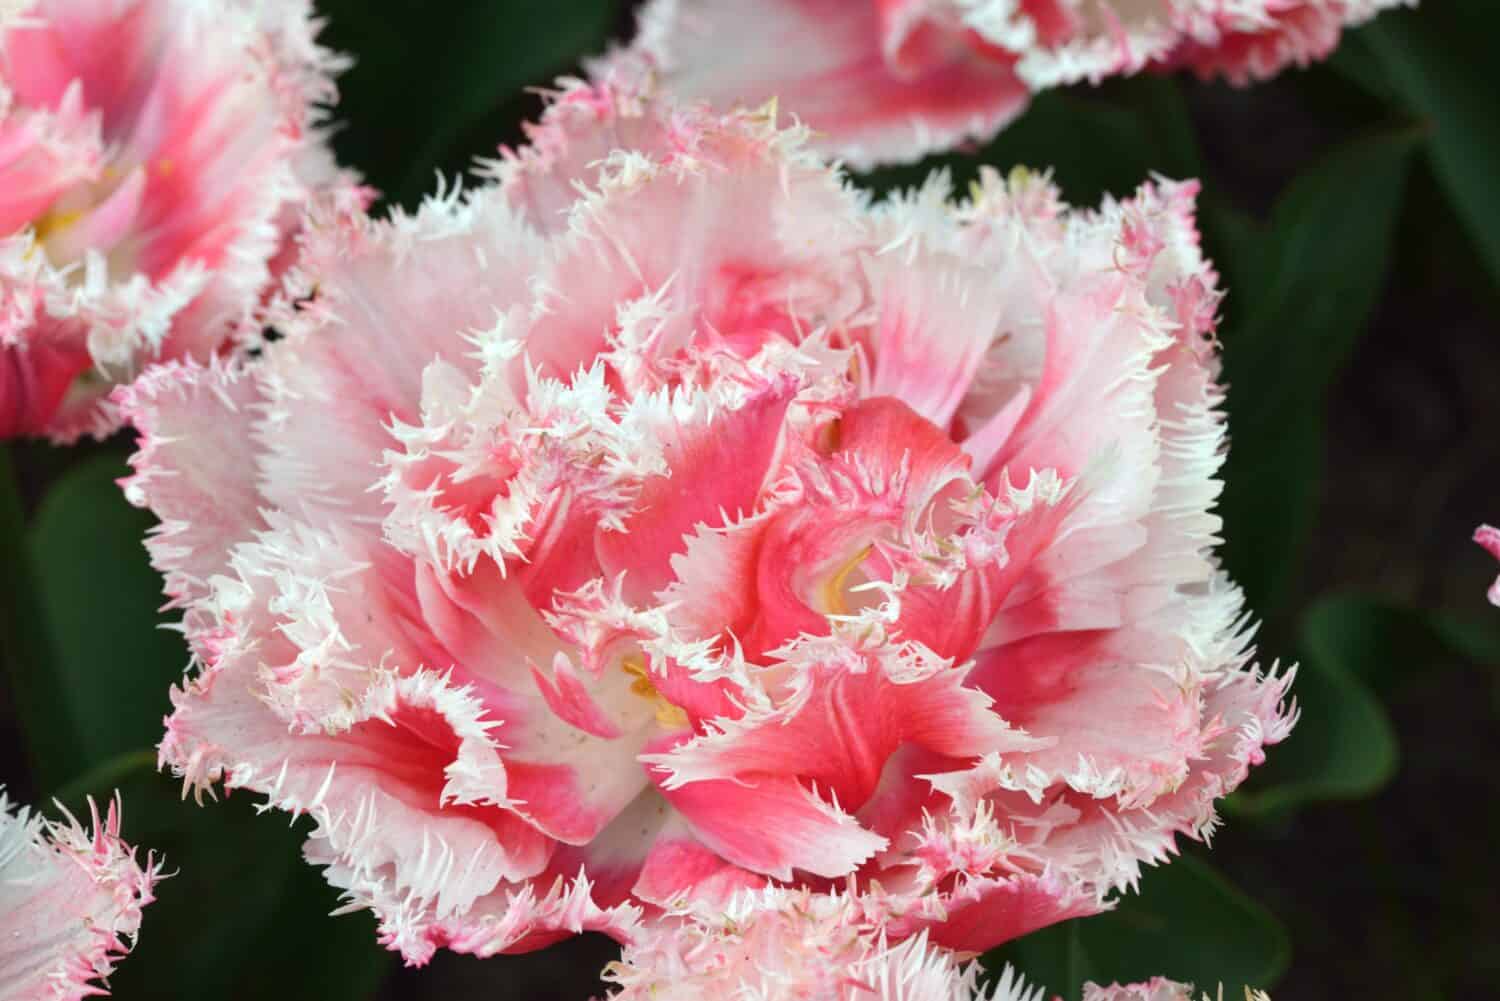 Tulipa 'Queensland' is a fringed tulip (Div. 7) with pink flowers